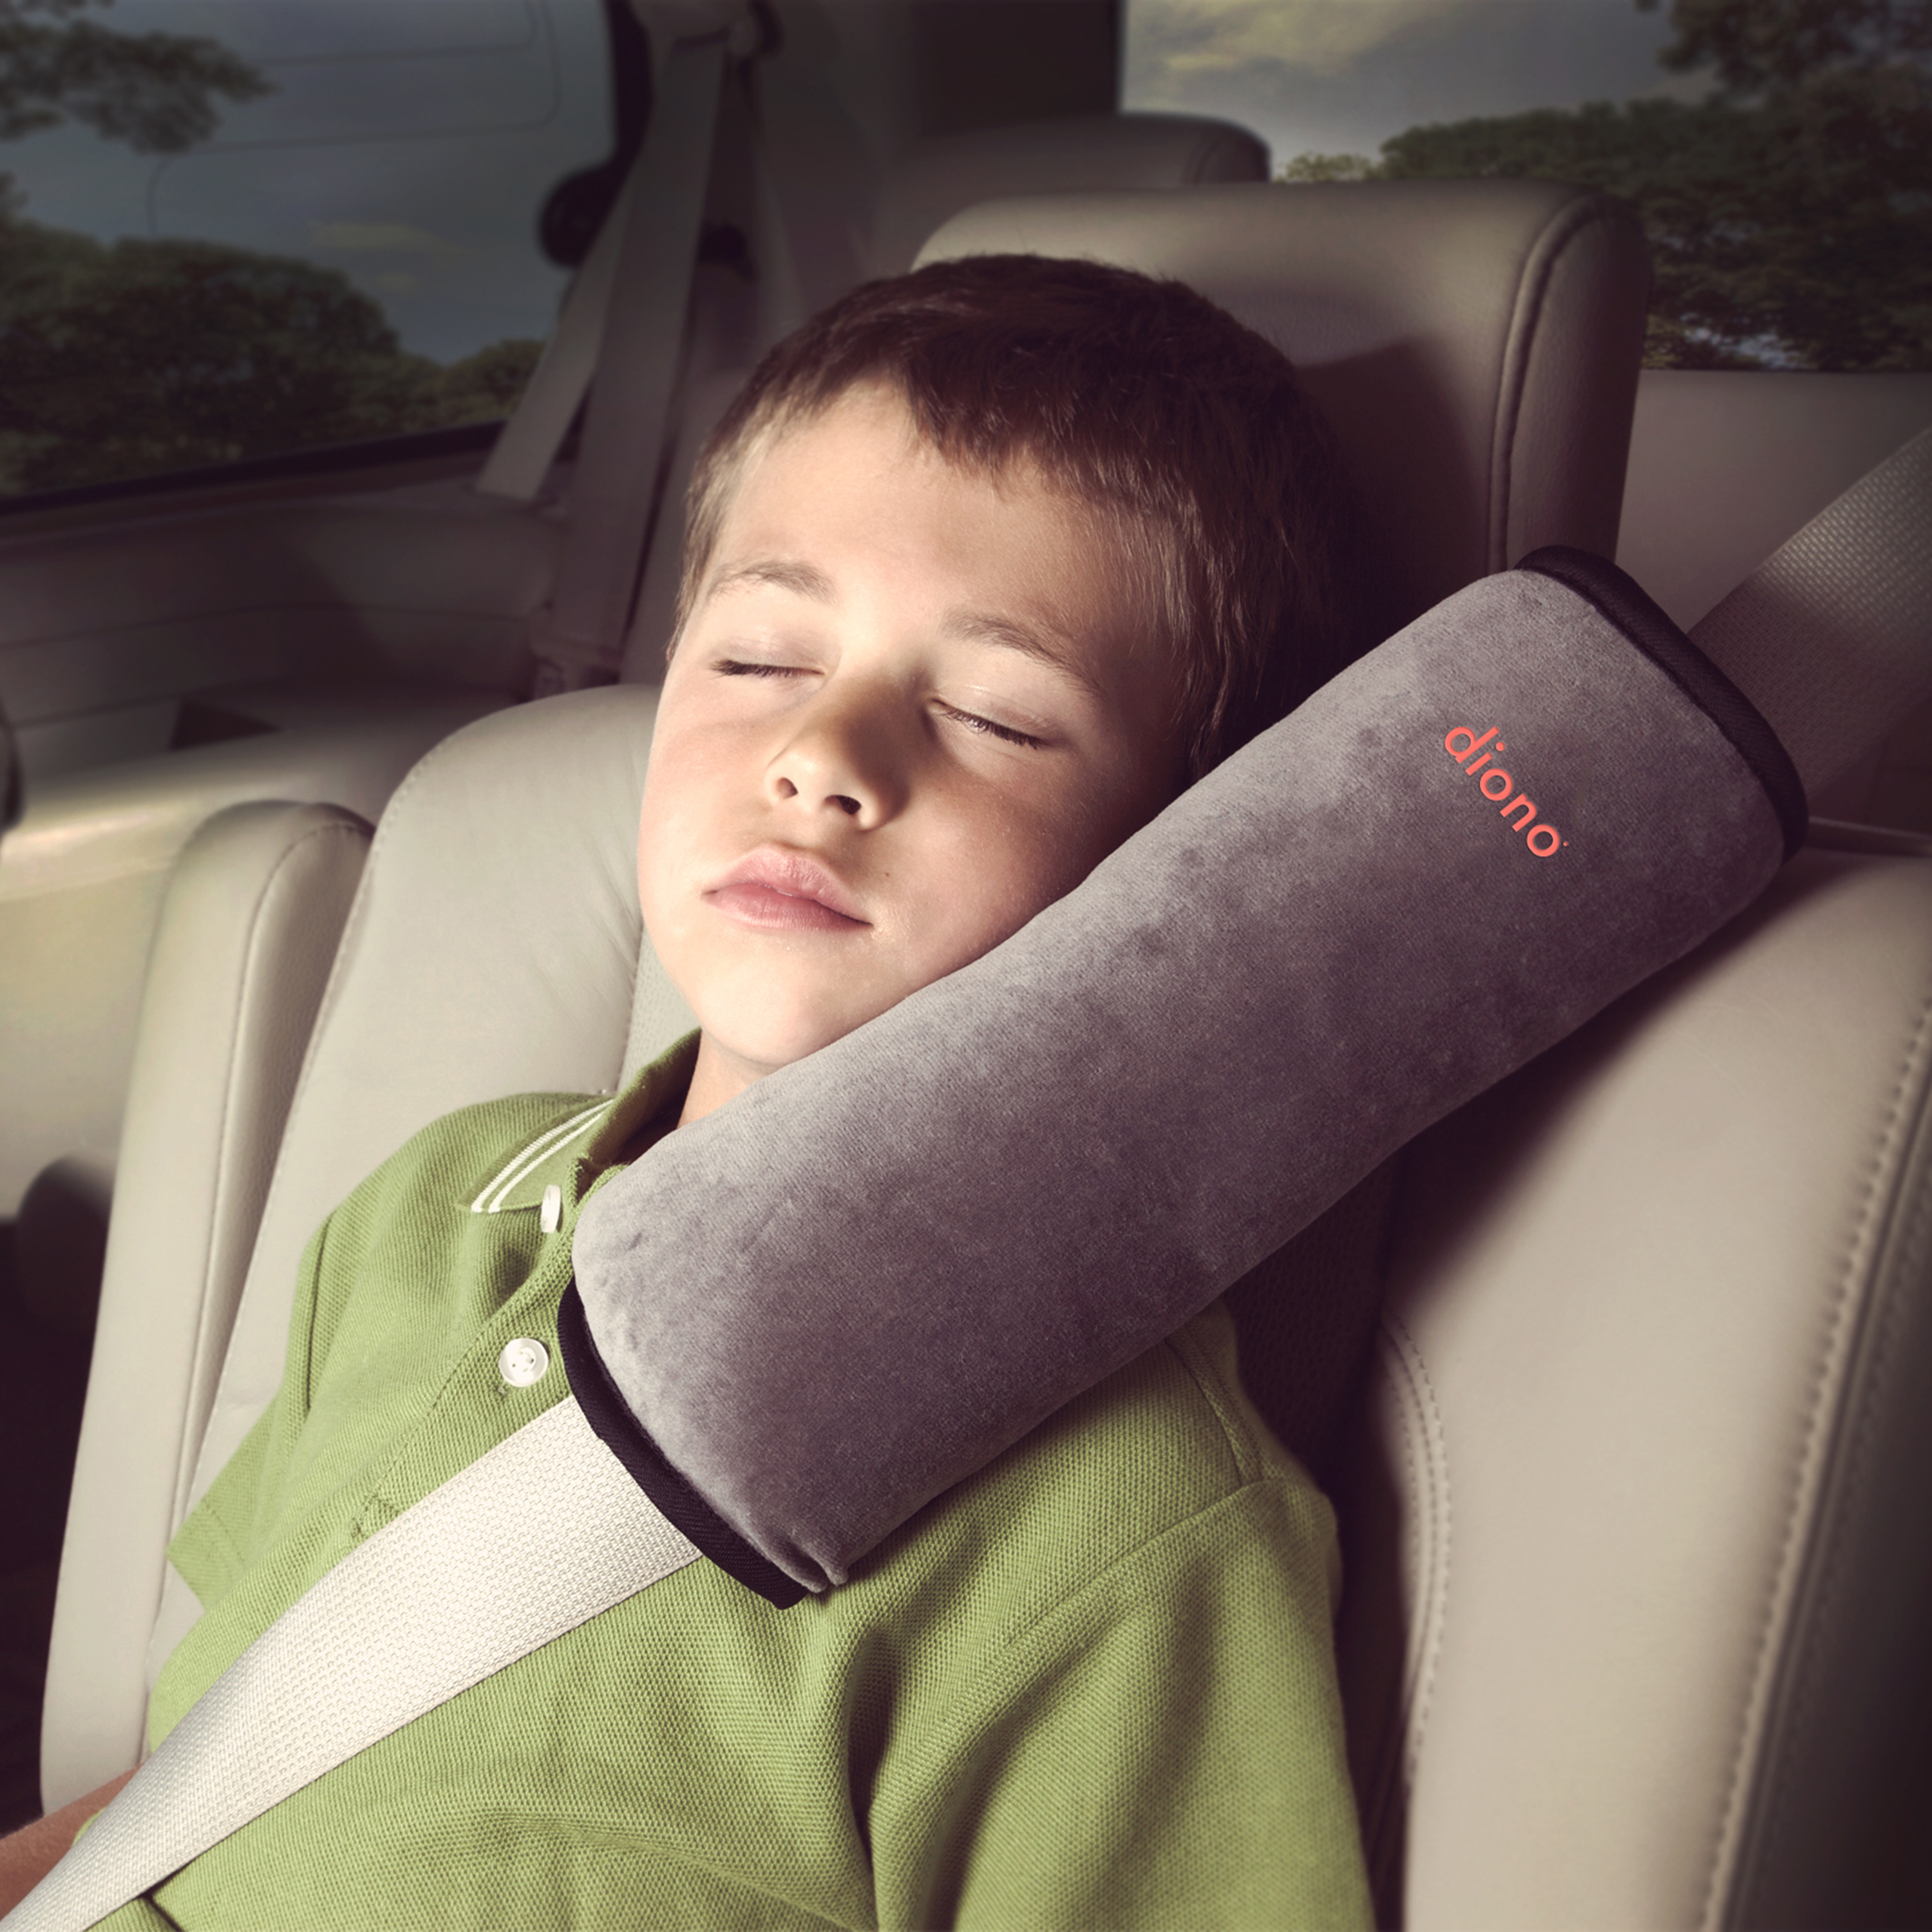 Diono Seat Belt Pillow, Made of Ultra Comfortable, Soft Micro-Fleece Fabric, Grey - image 2 of 3